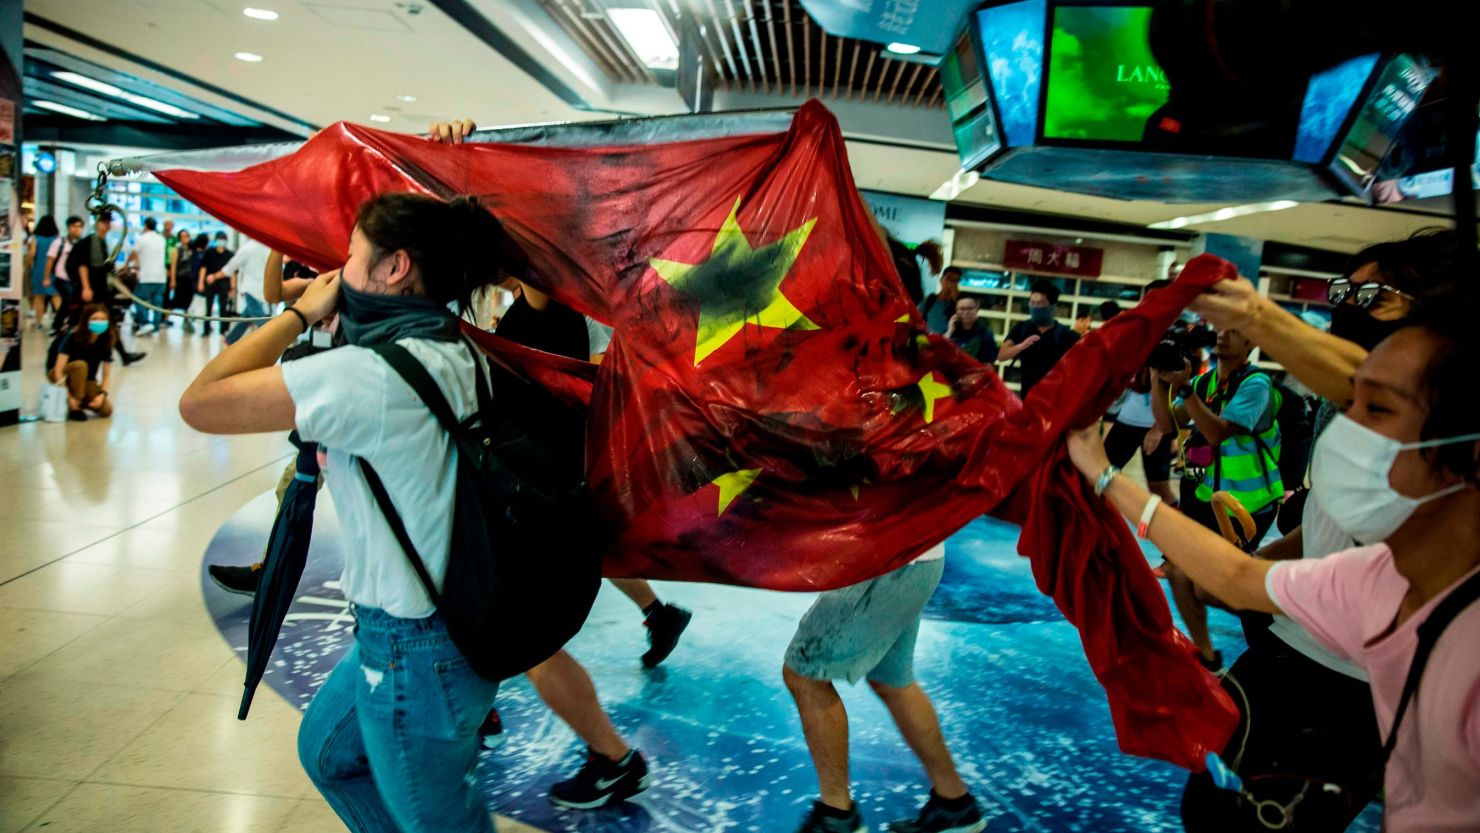 Pro-democracy protesters desecrate the Chinese national flag during a protest at the New Town Plaza shopping mall in Hong Kong's Sha Tin district on September 22, 2019.